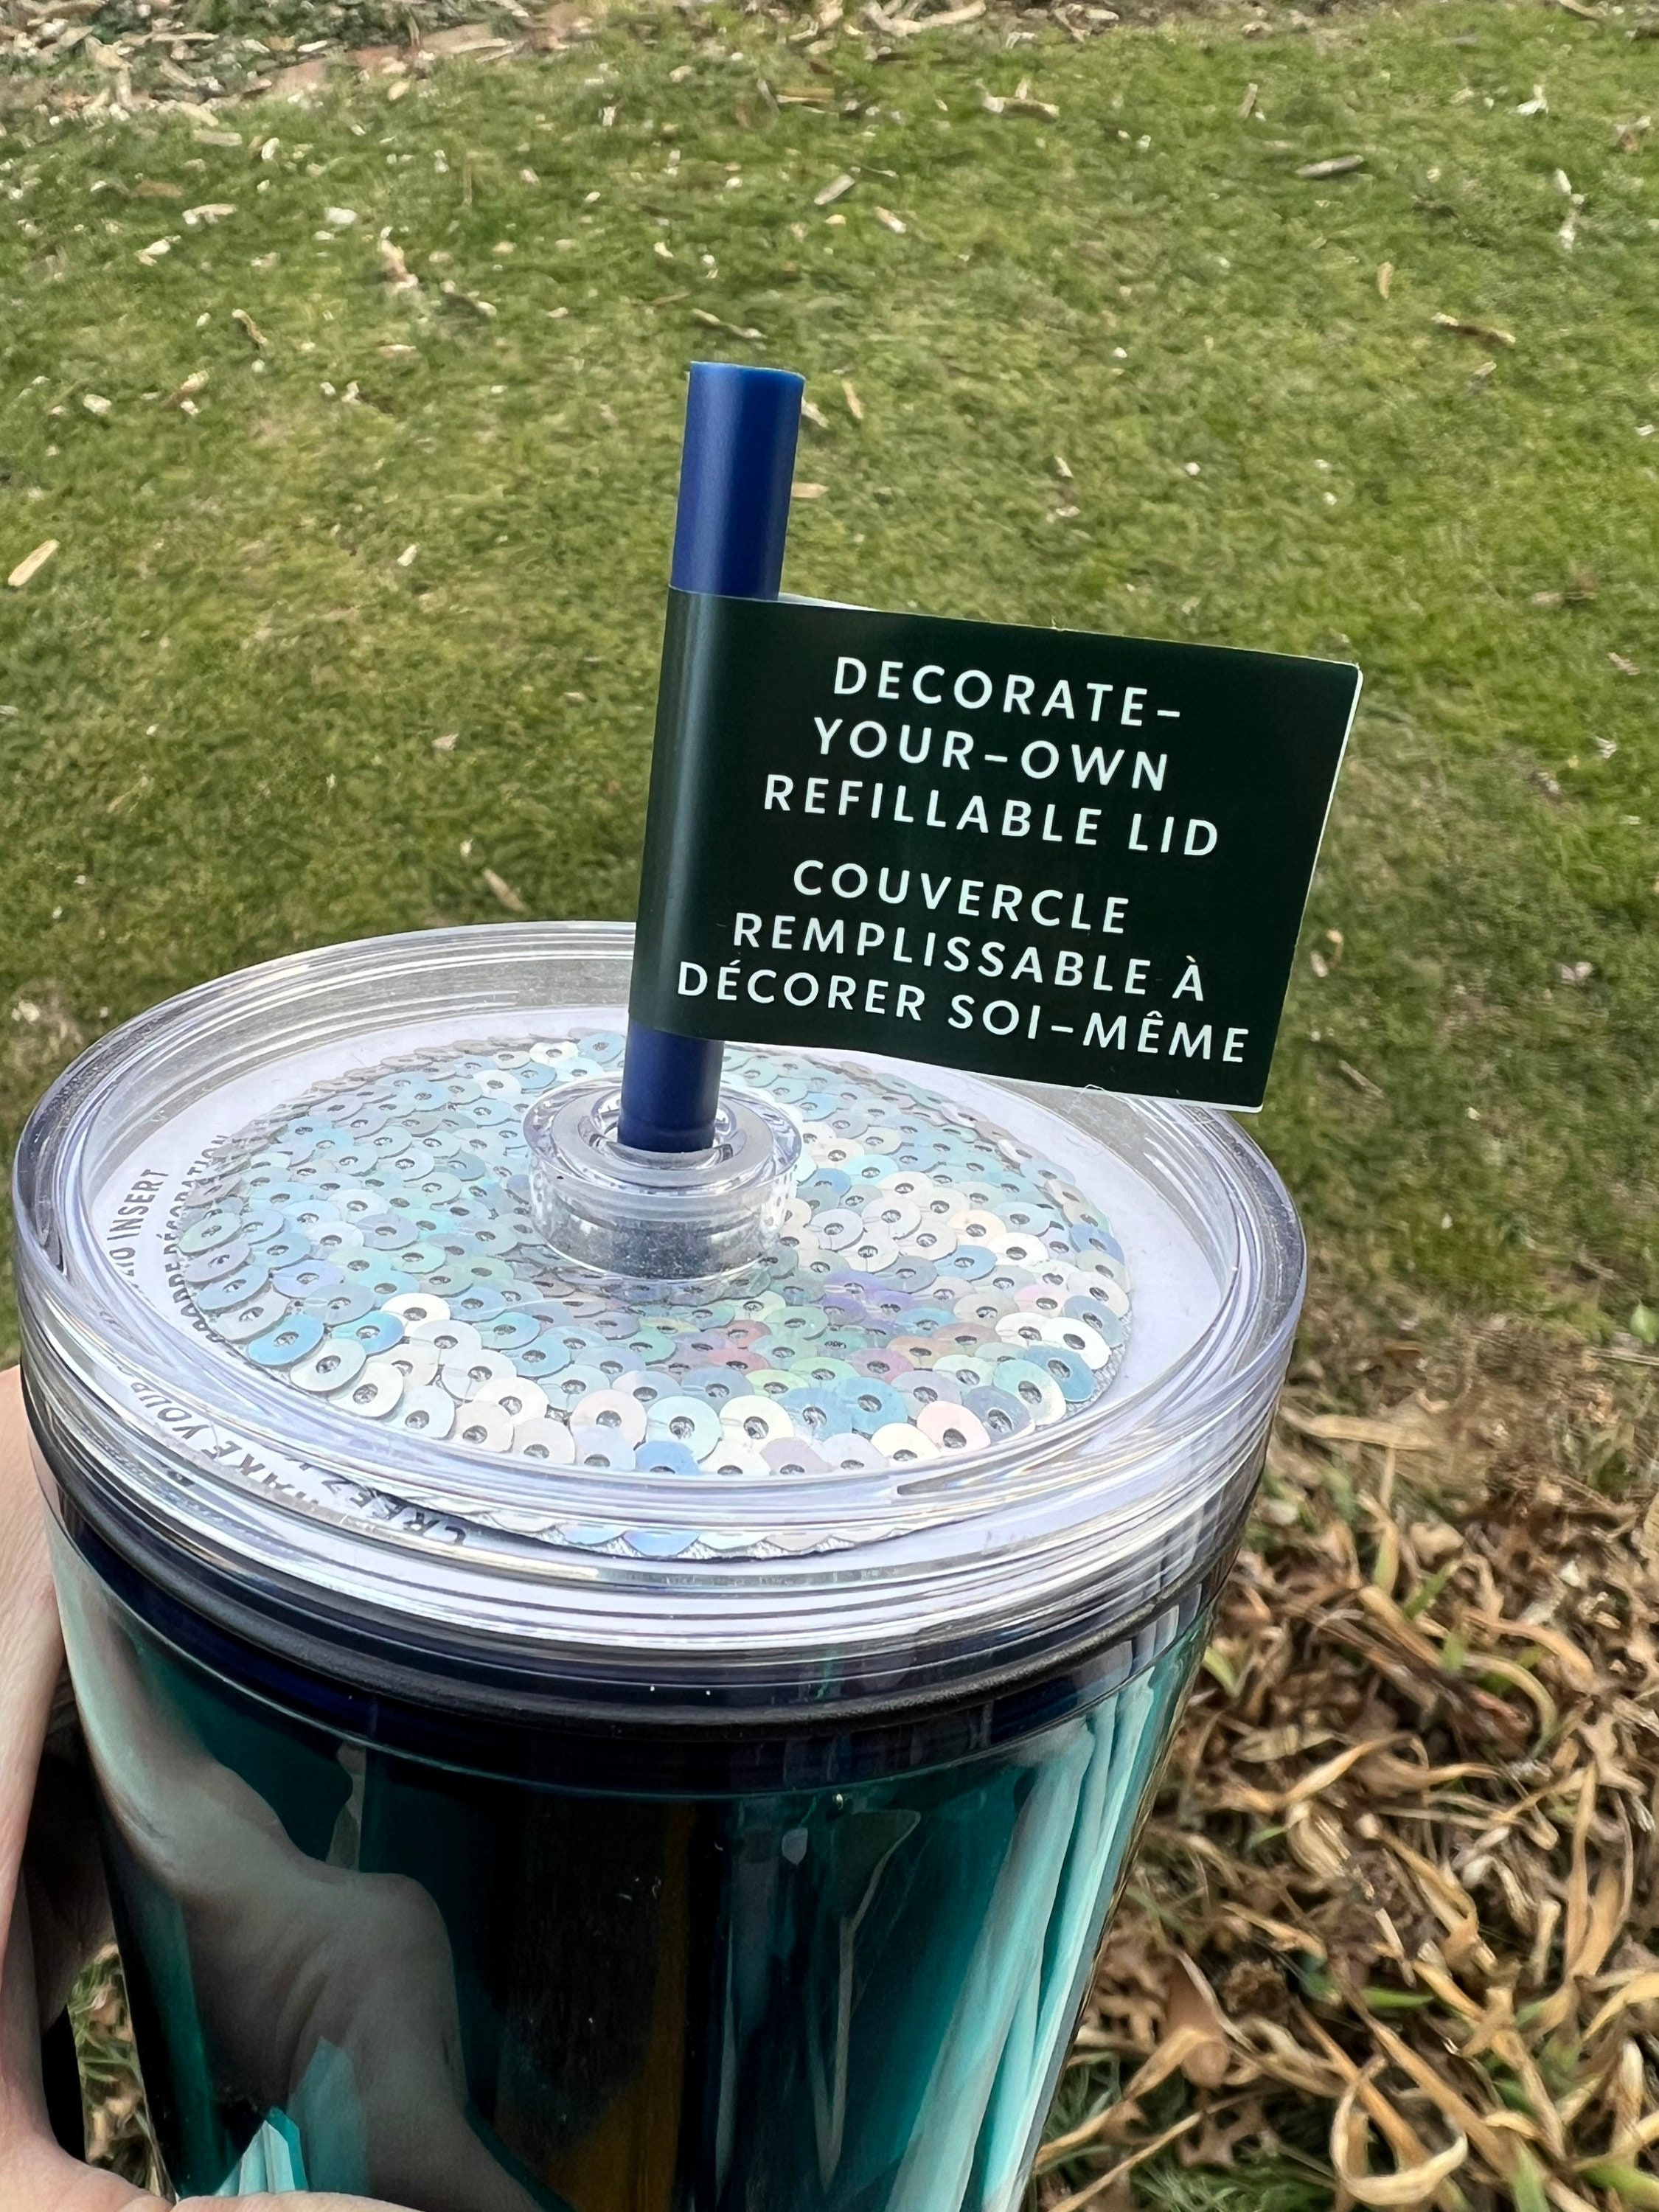 Inside the Thriving World of Starbucks Reusable Cup Collectors - Eater